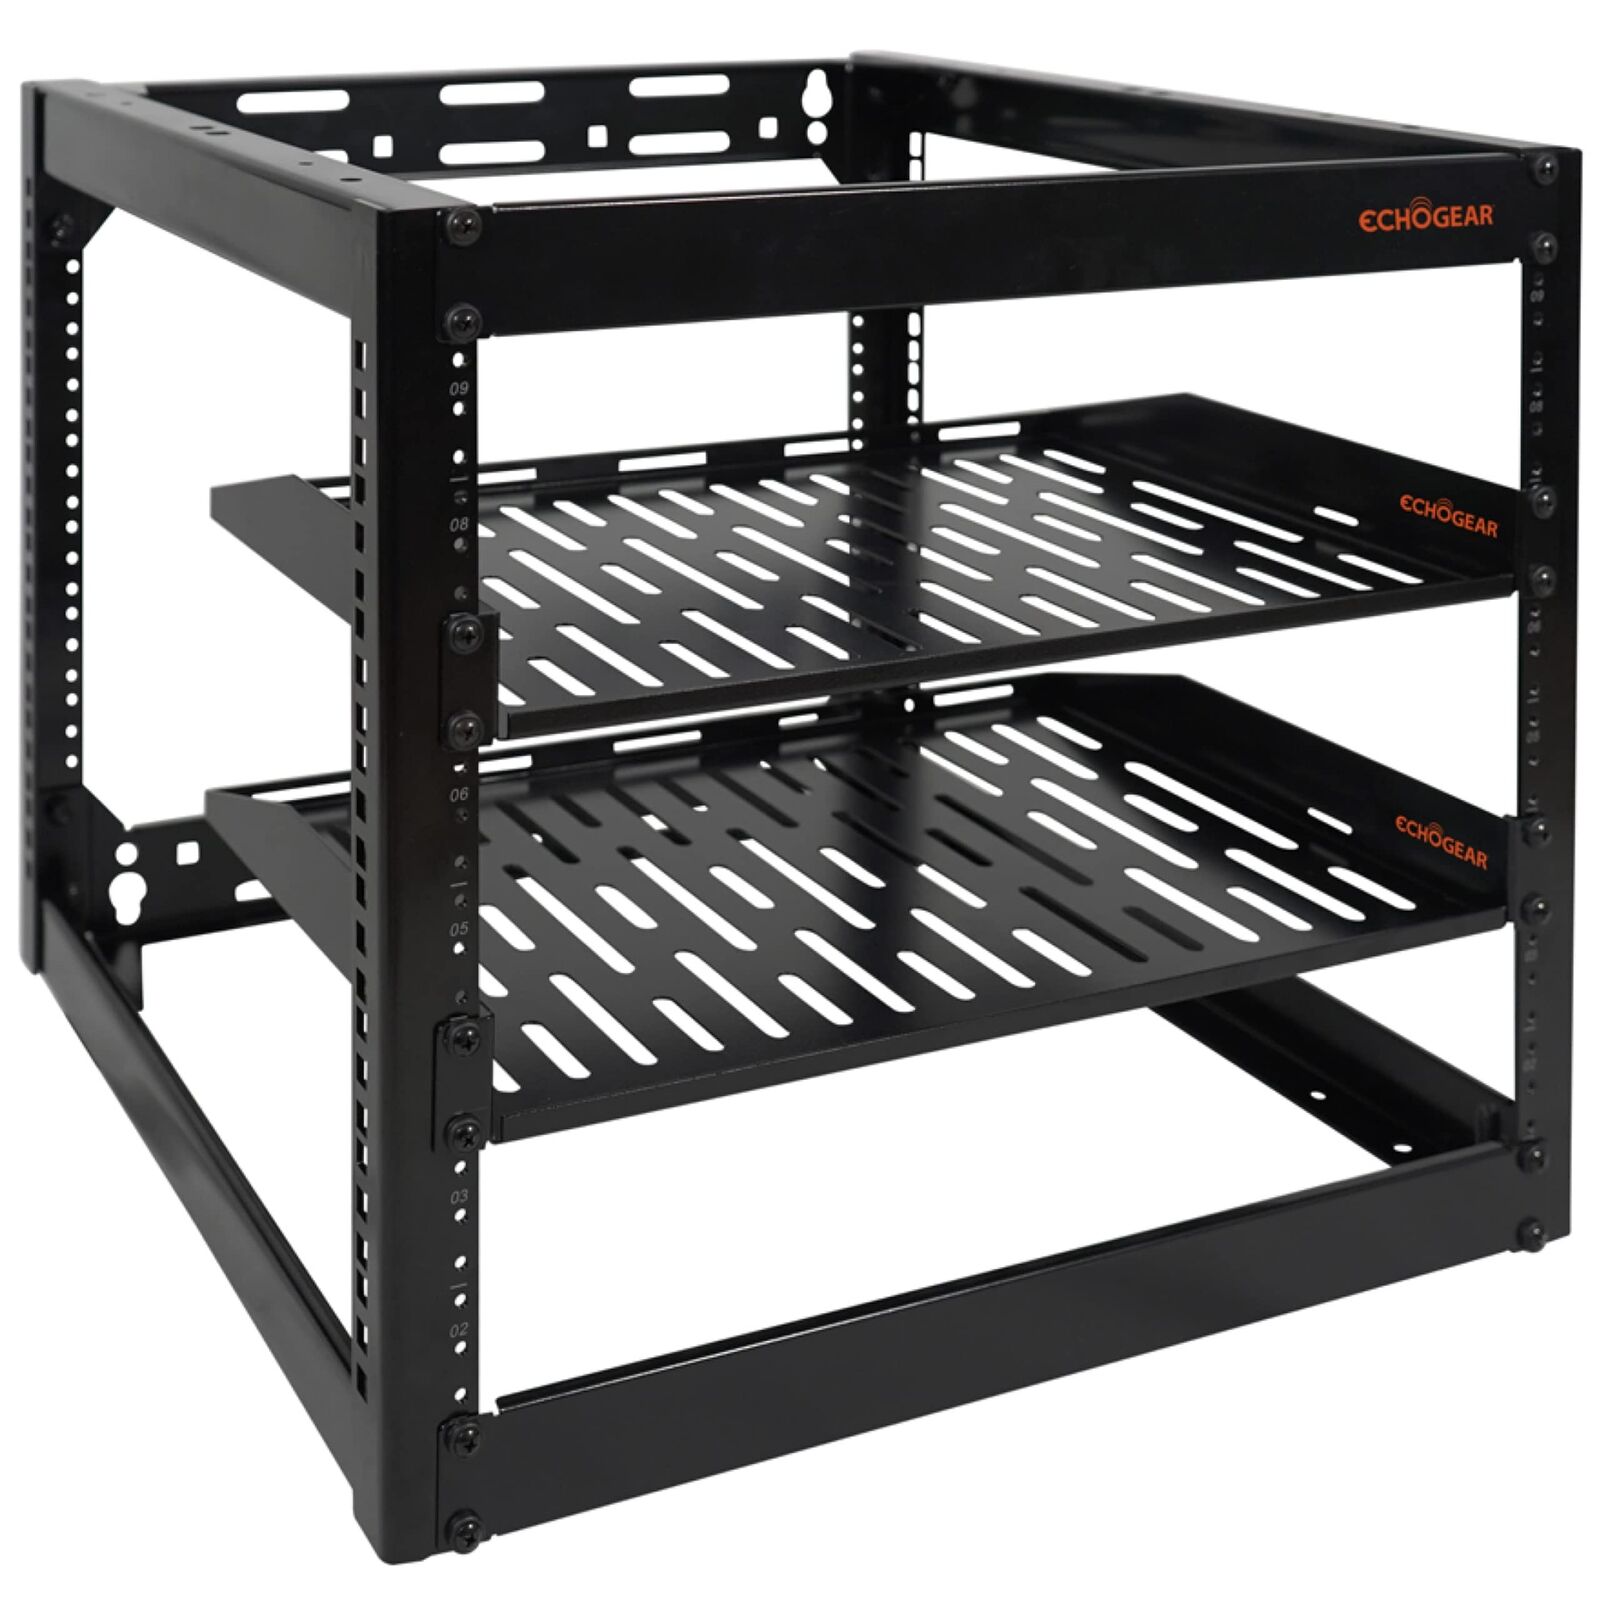 10U Network Rack - Wall Mountable Heavy Duty 4 Post Design Holds All Your Net...